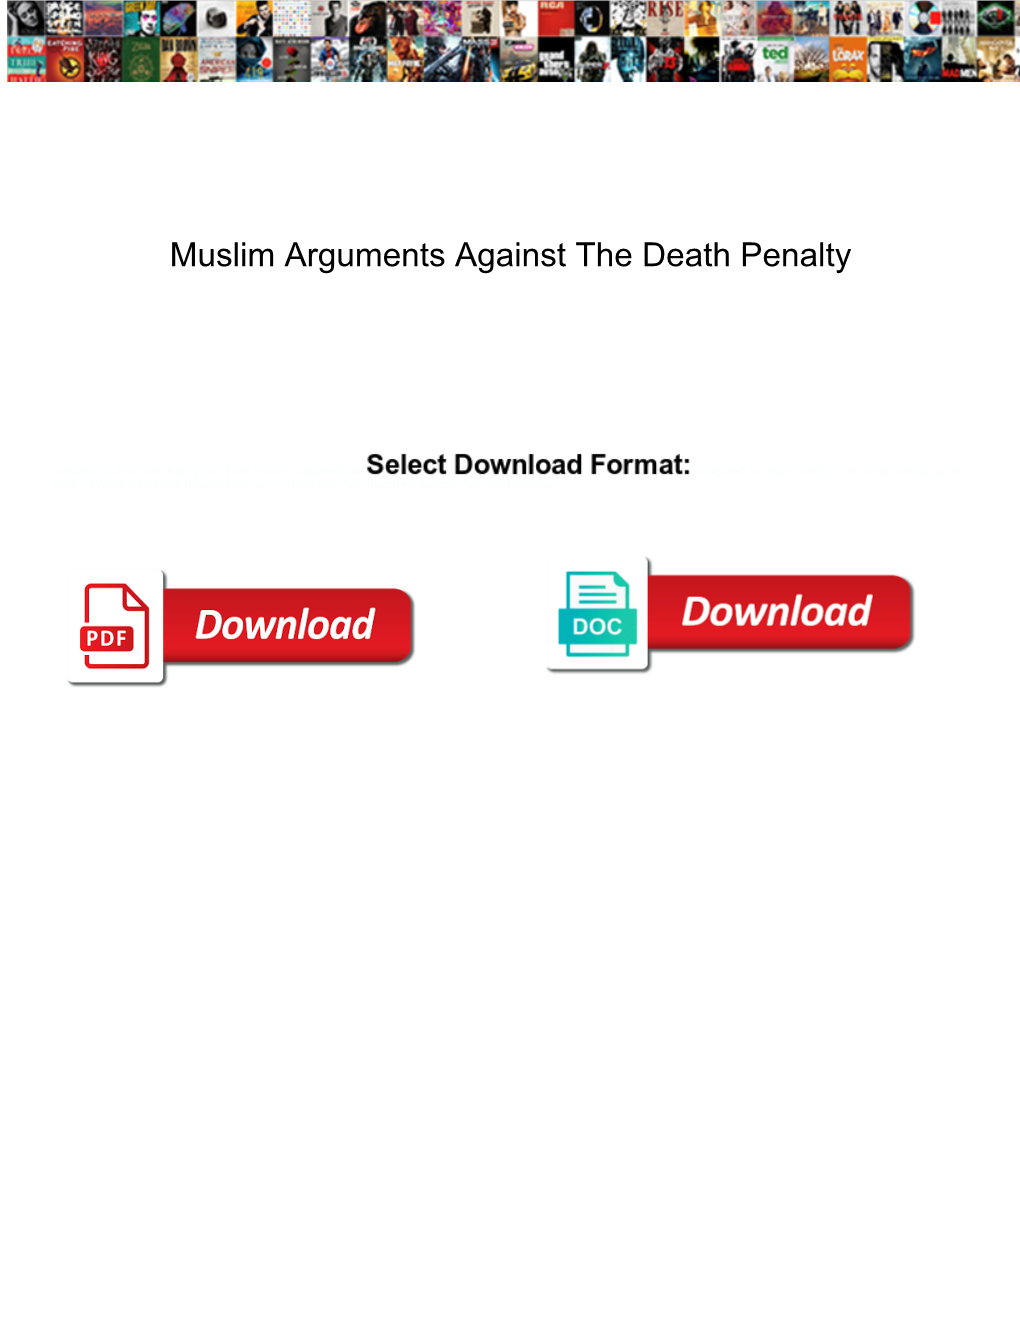 Muslim Arguments Against the Death Penalty